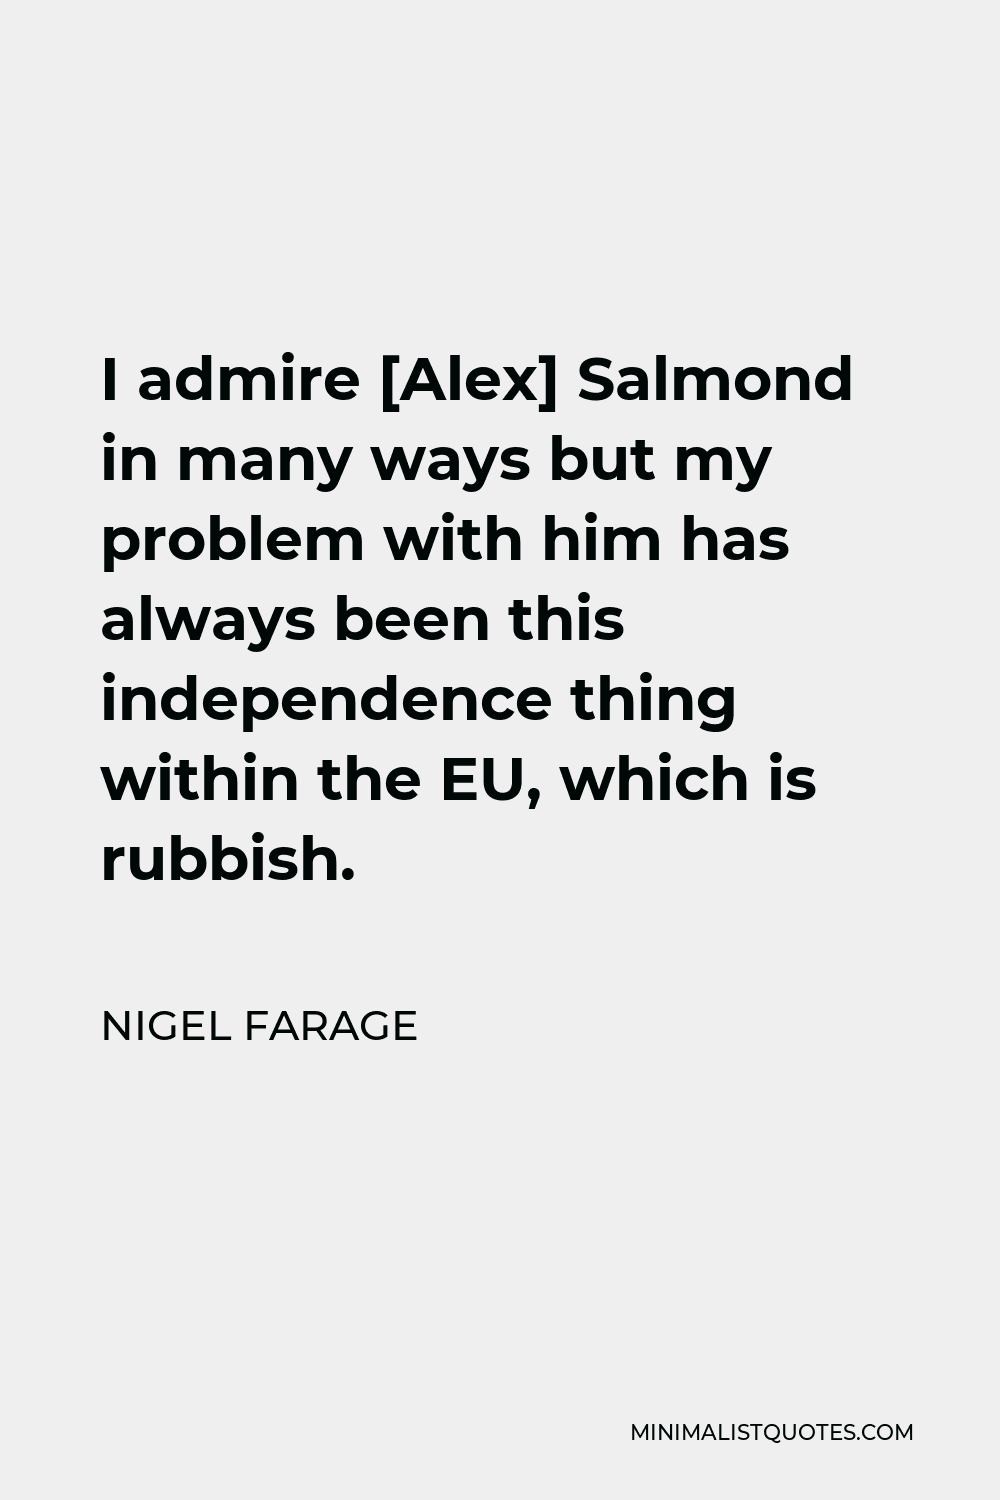 Nigel Farage Quote - I admire [Alex] Salmond in many ways but my problem with him has always been this independence thing within the EU, which is rubbish.